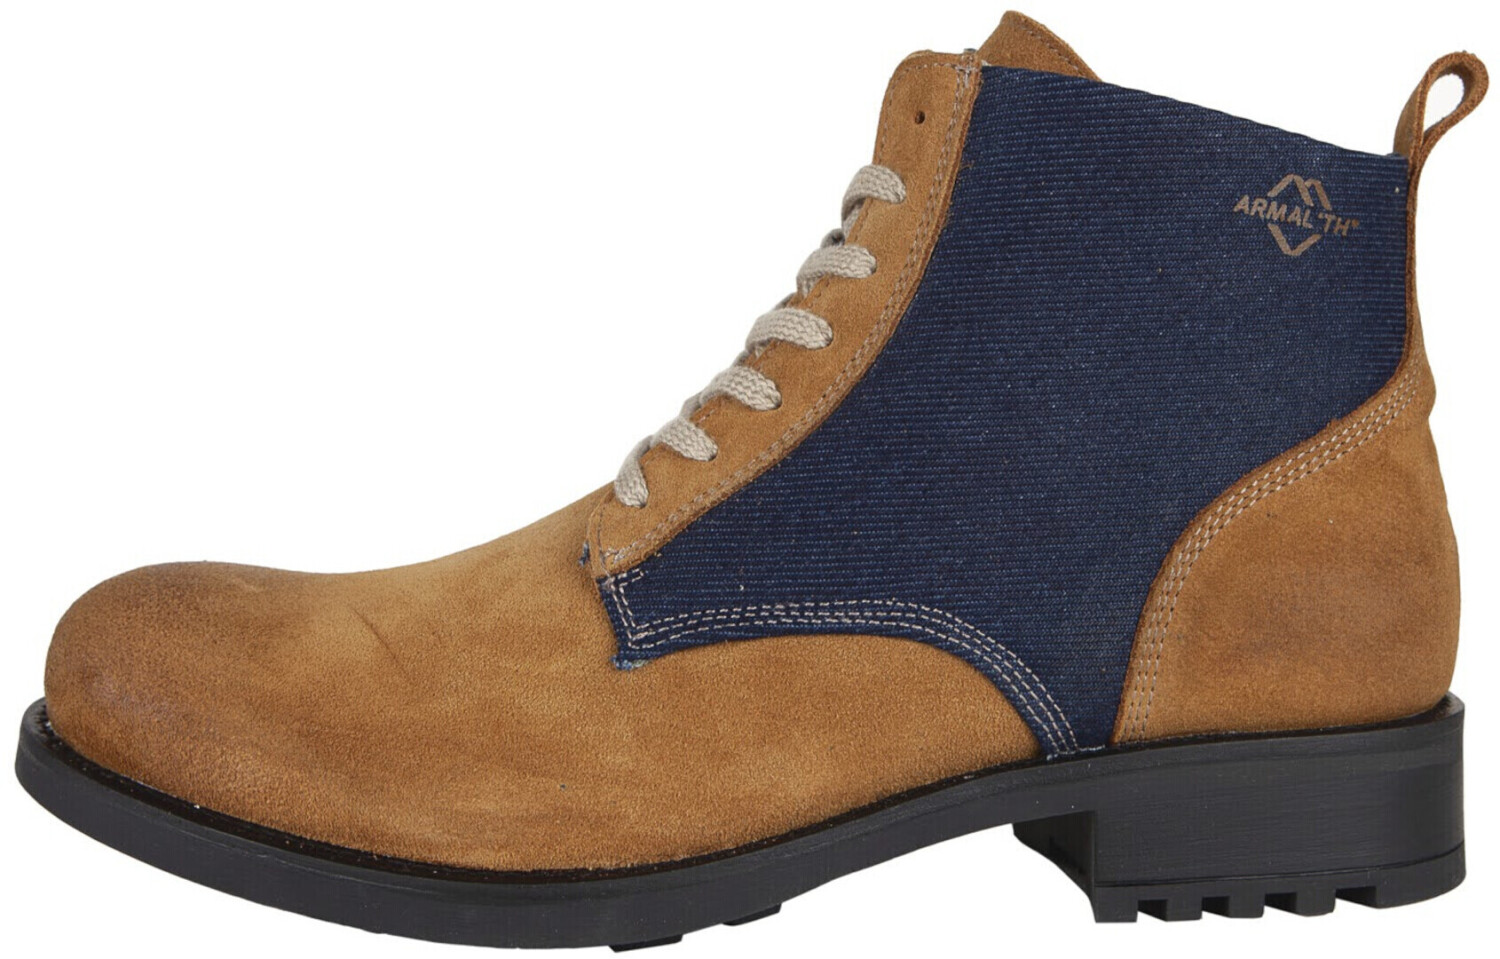 Photos - Motorcycle Boots Helston's Helston's Deville Armalith blue/brown